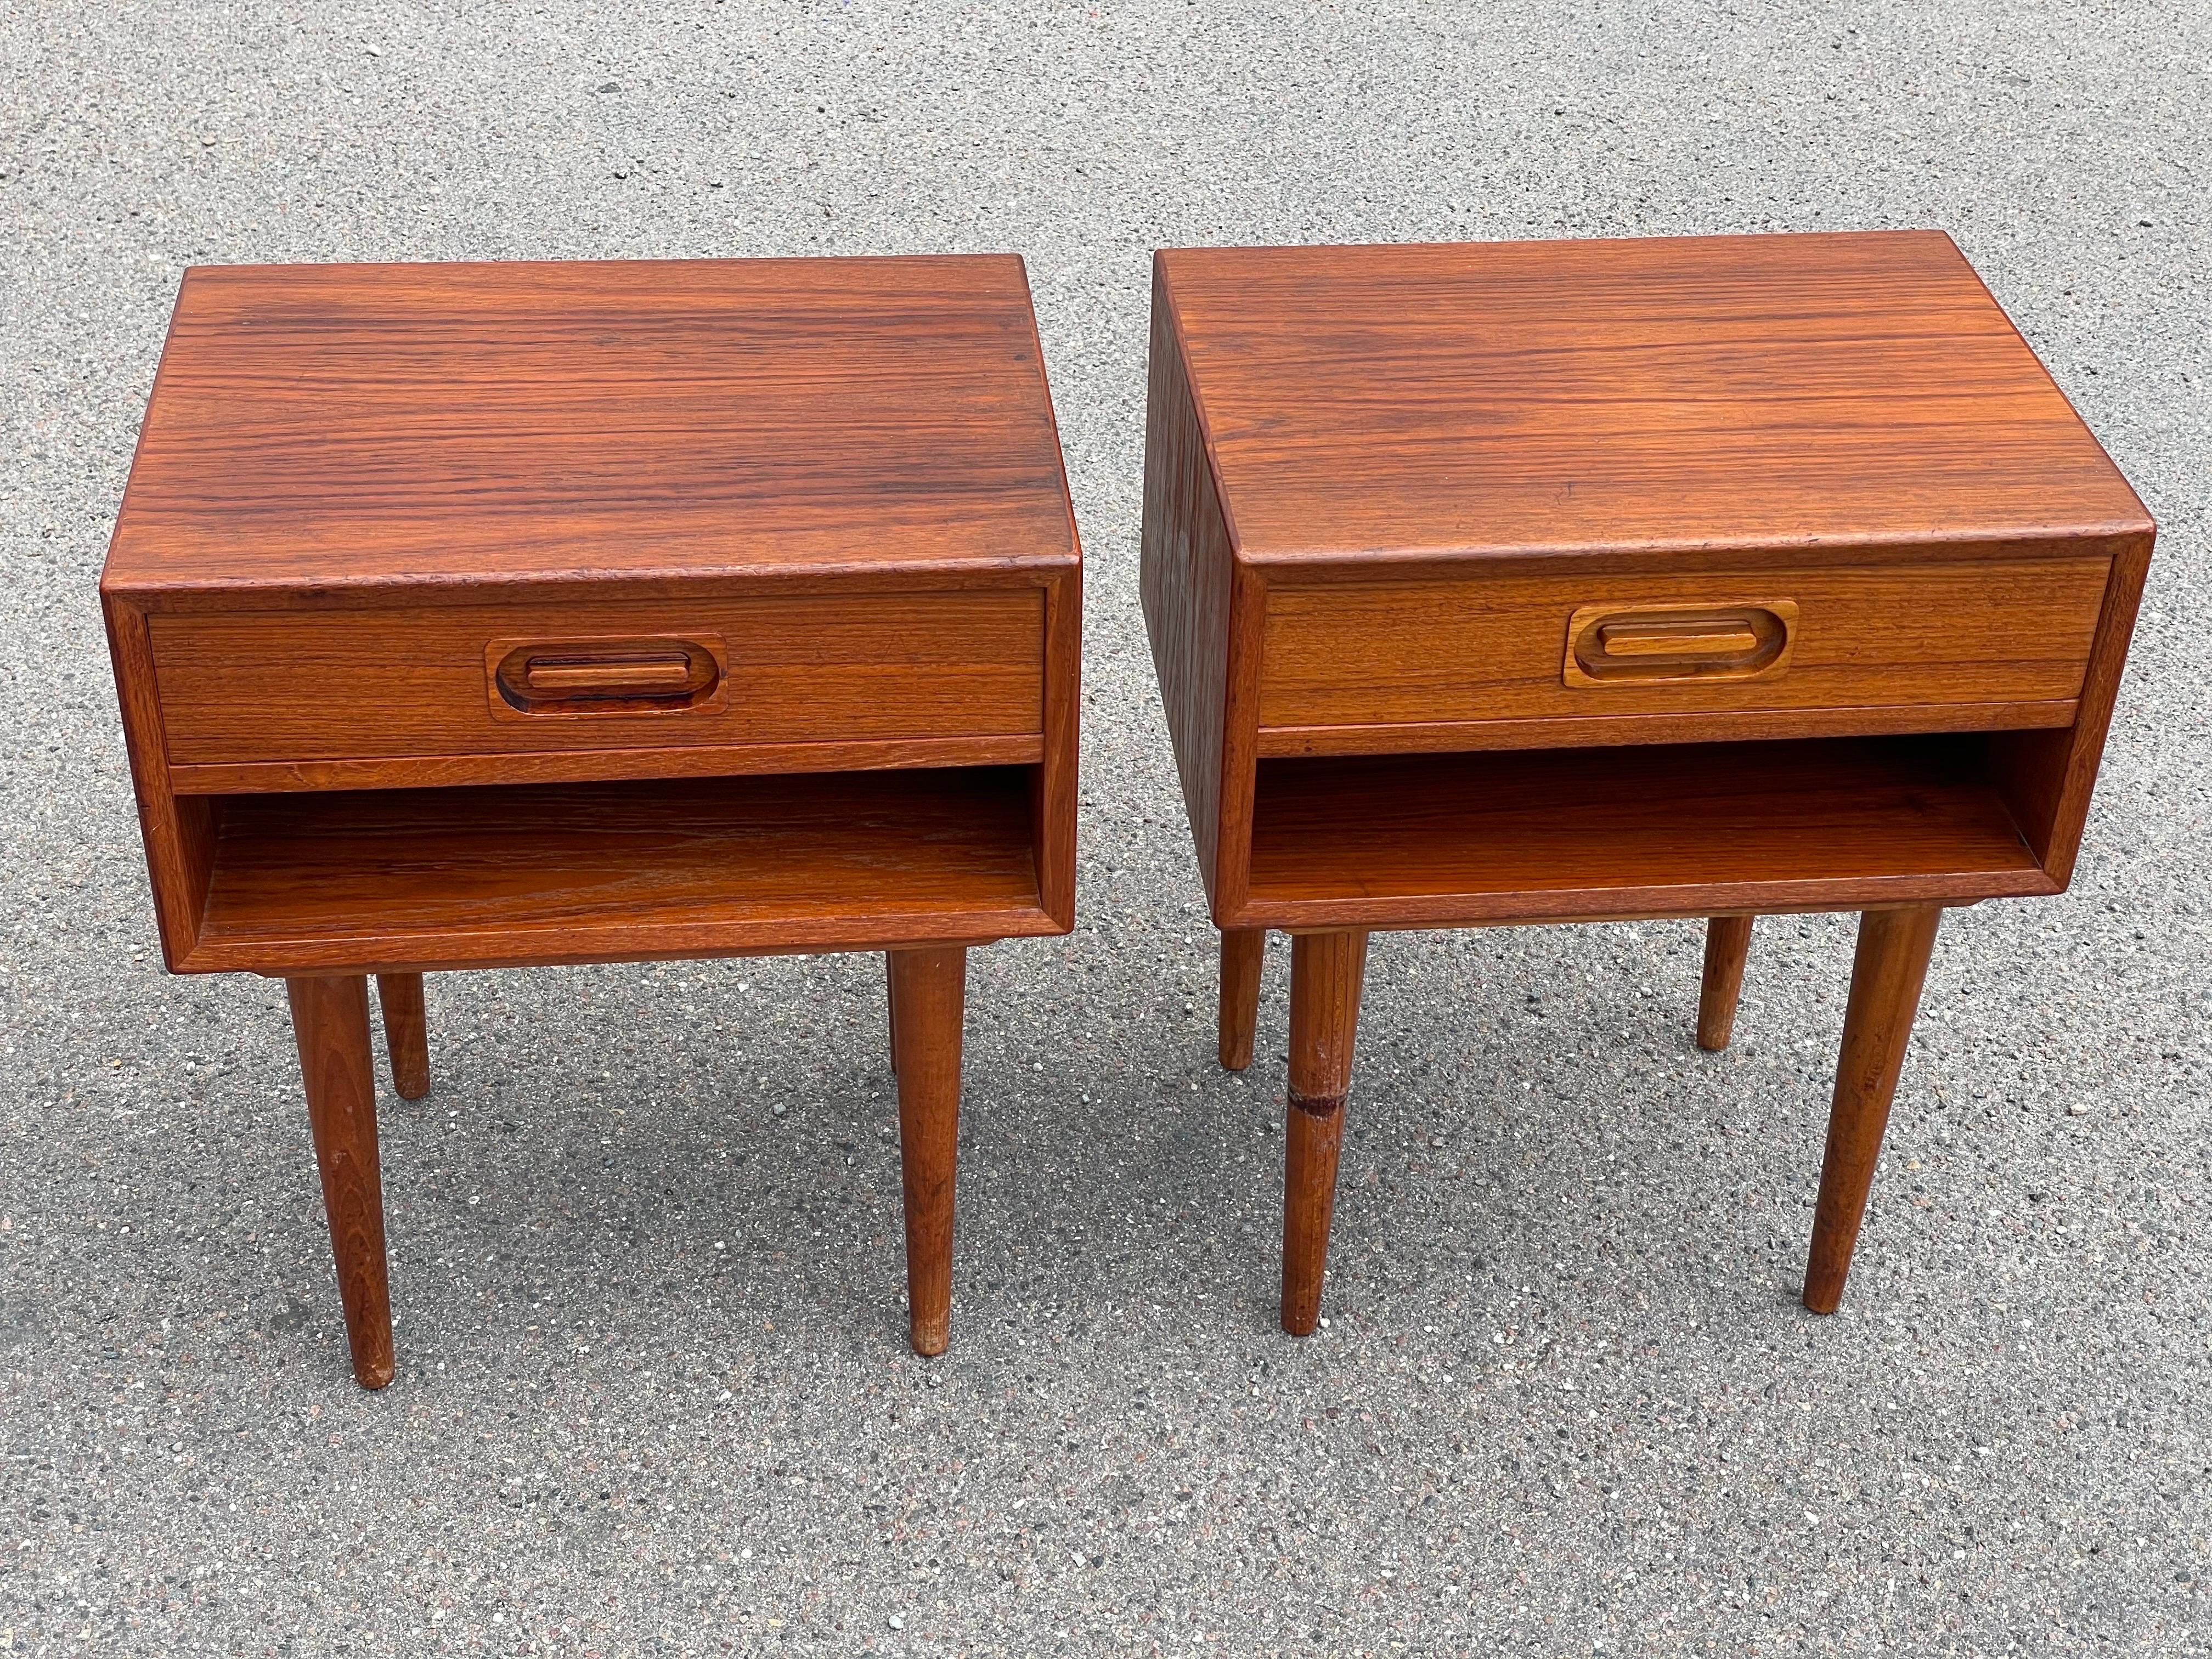 A remarkable pair of rare Johannes Andersen teak nightstands from the 1960s, crafted with precision for the esteemed Dyrlund furniture makers. These mid-century modern masterpieces embody the timeless elegance and functionality synonymous with